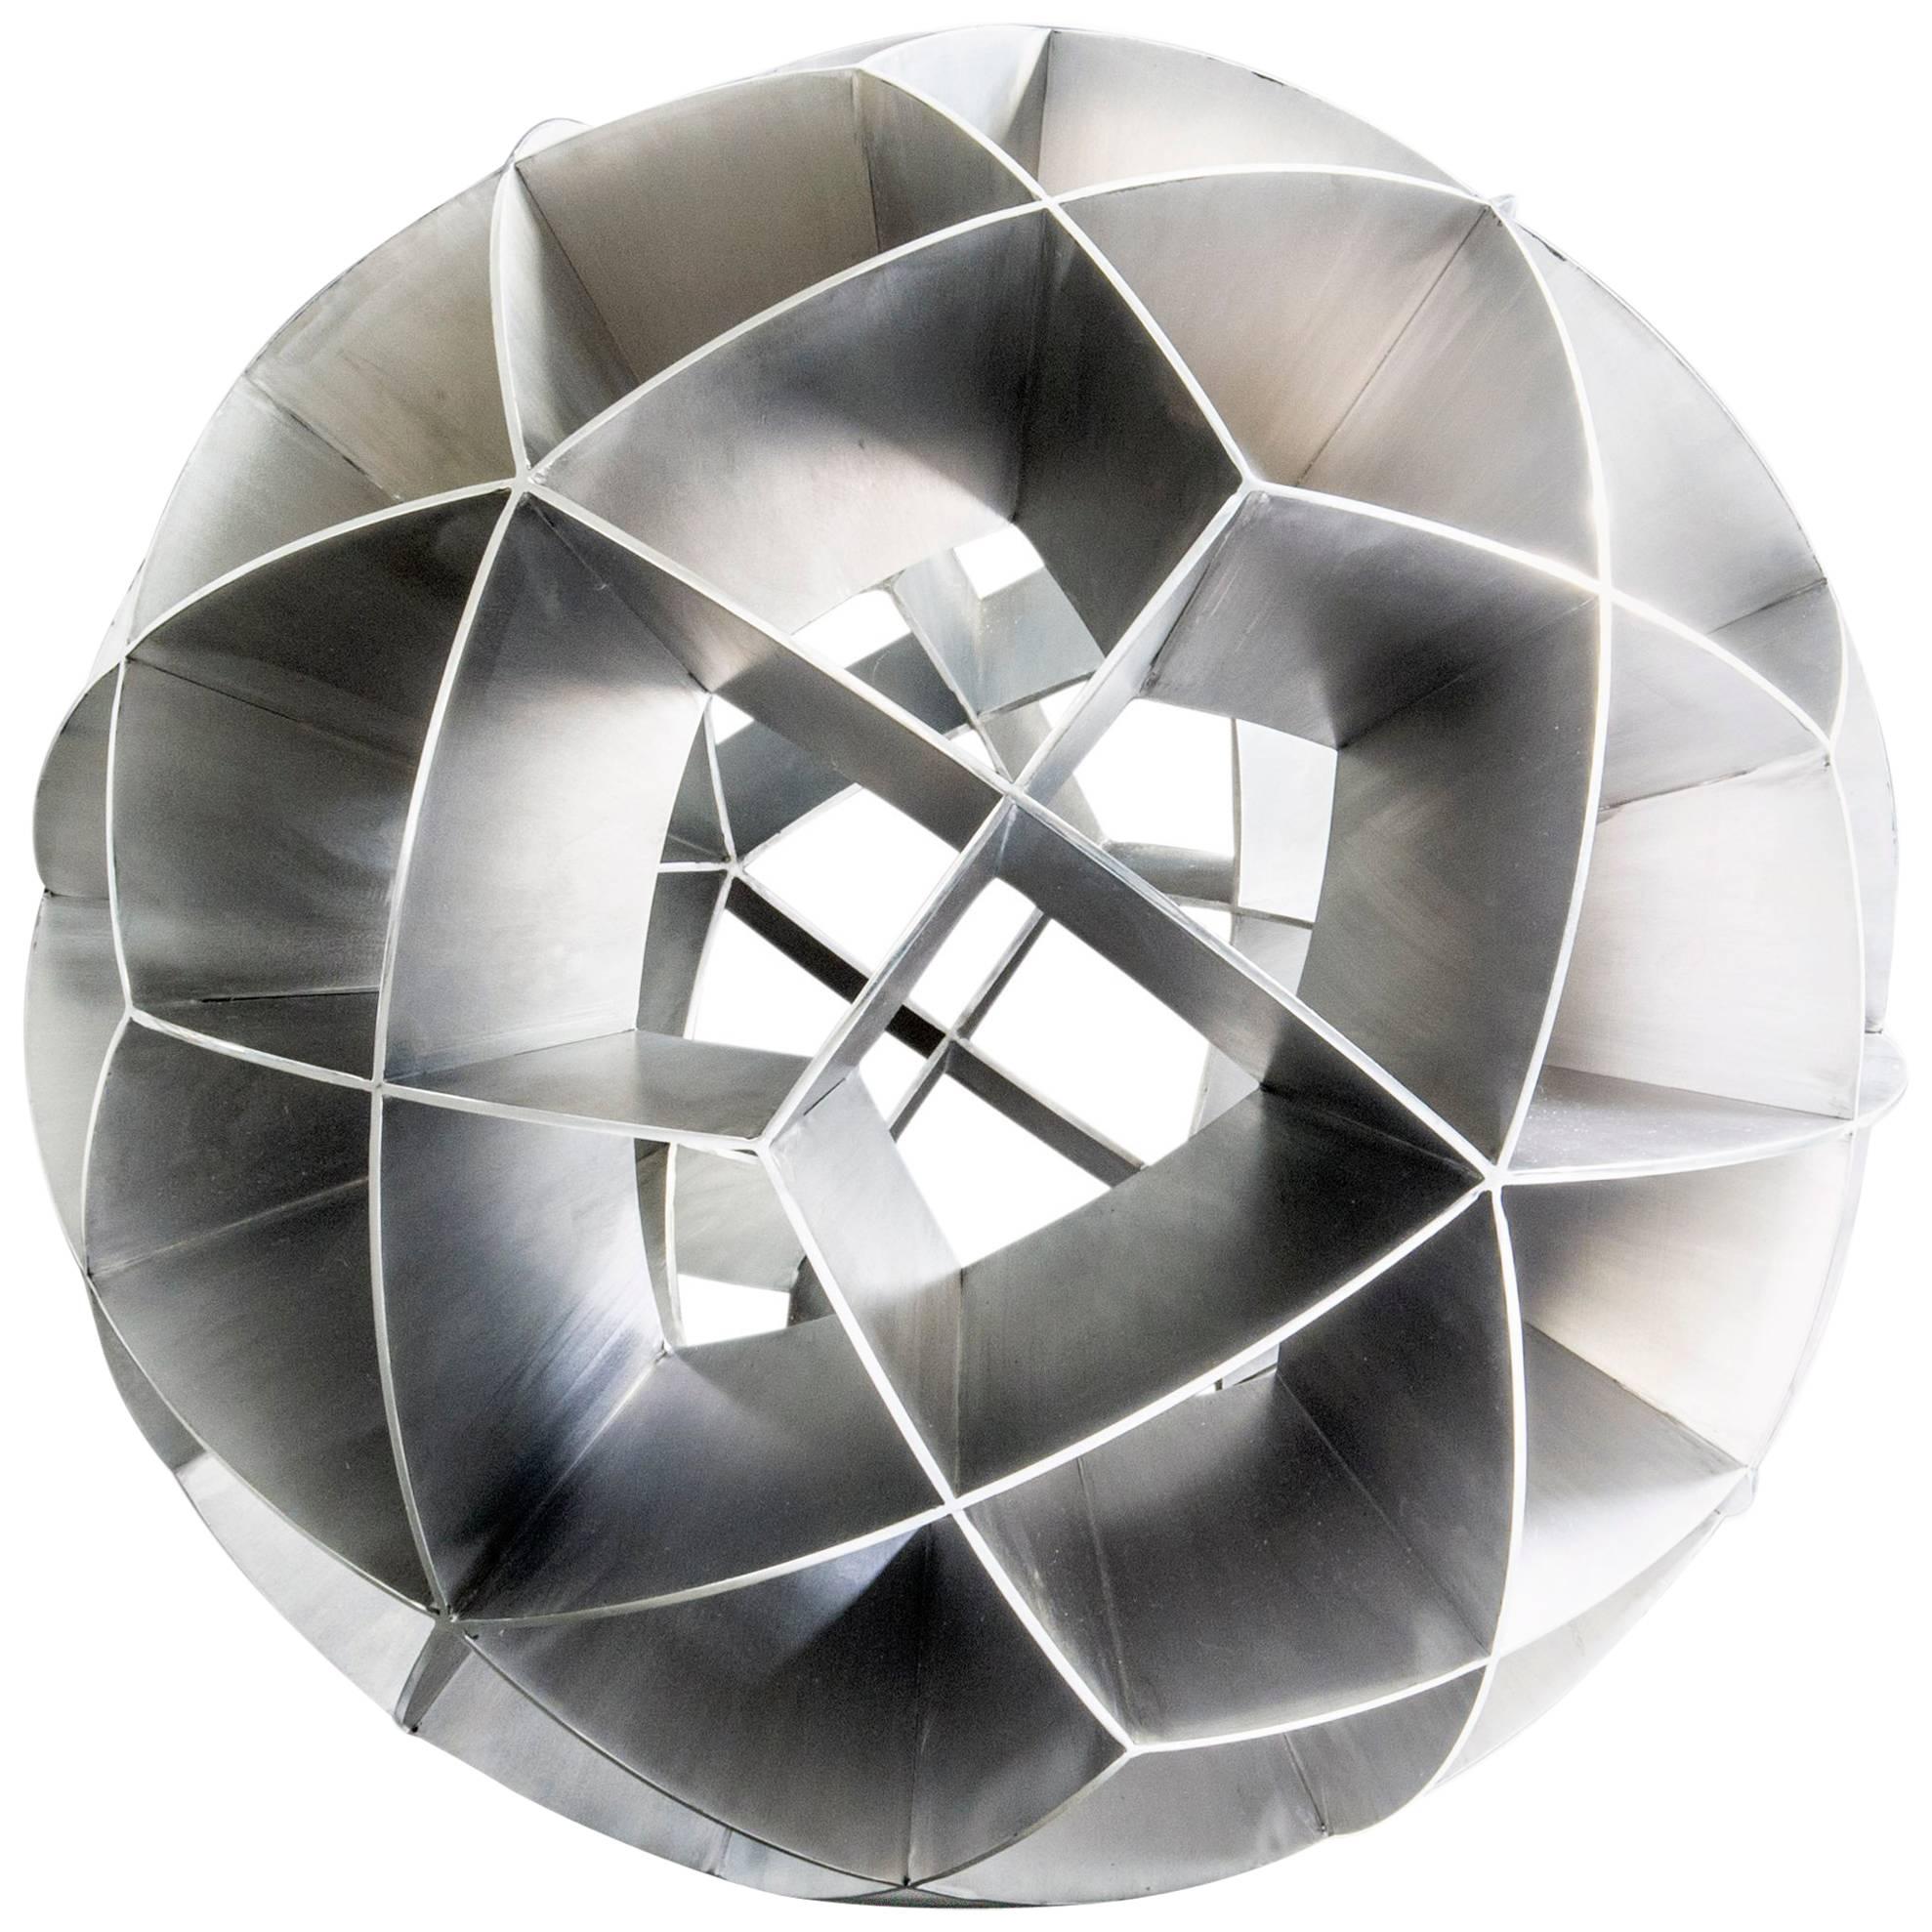 Contemporary Mexican Geometric Stainless Steel Trapezoidal Sphere Sculpture